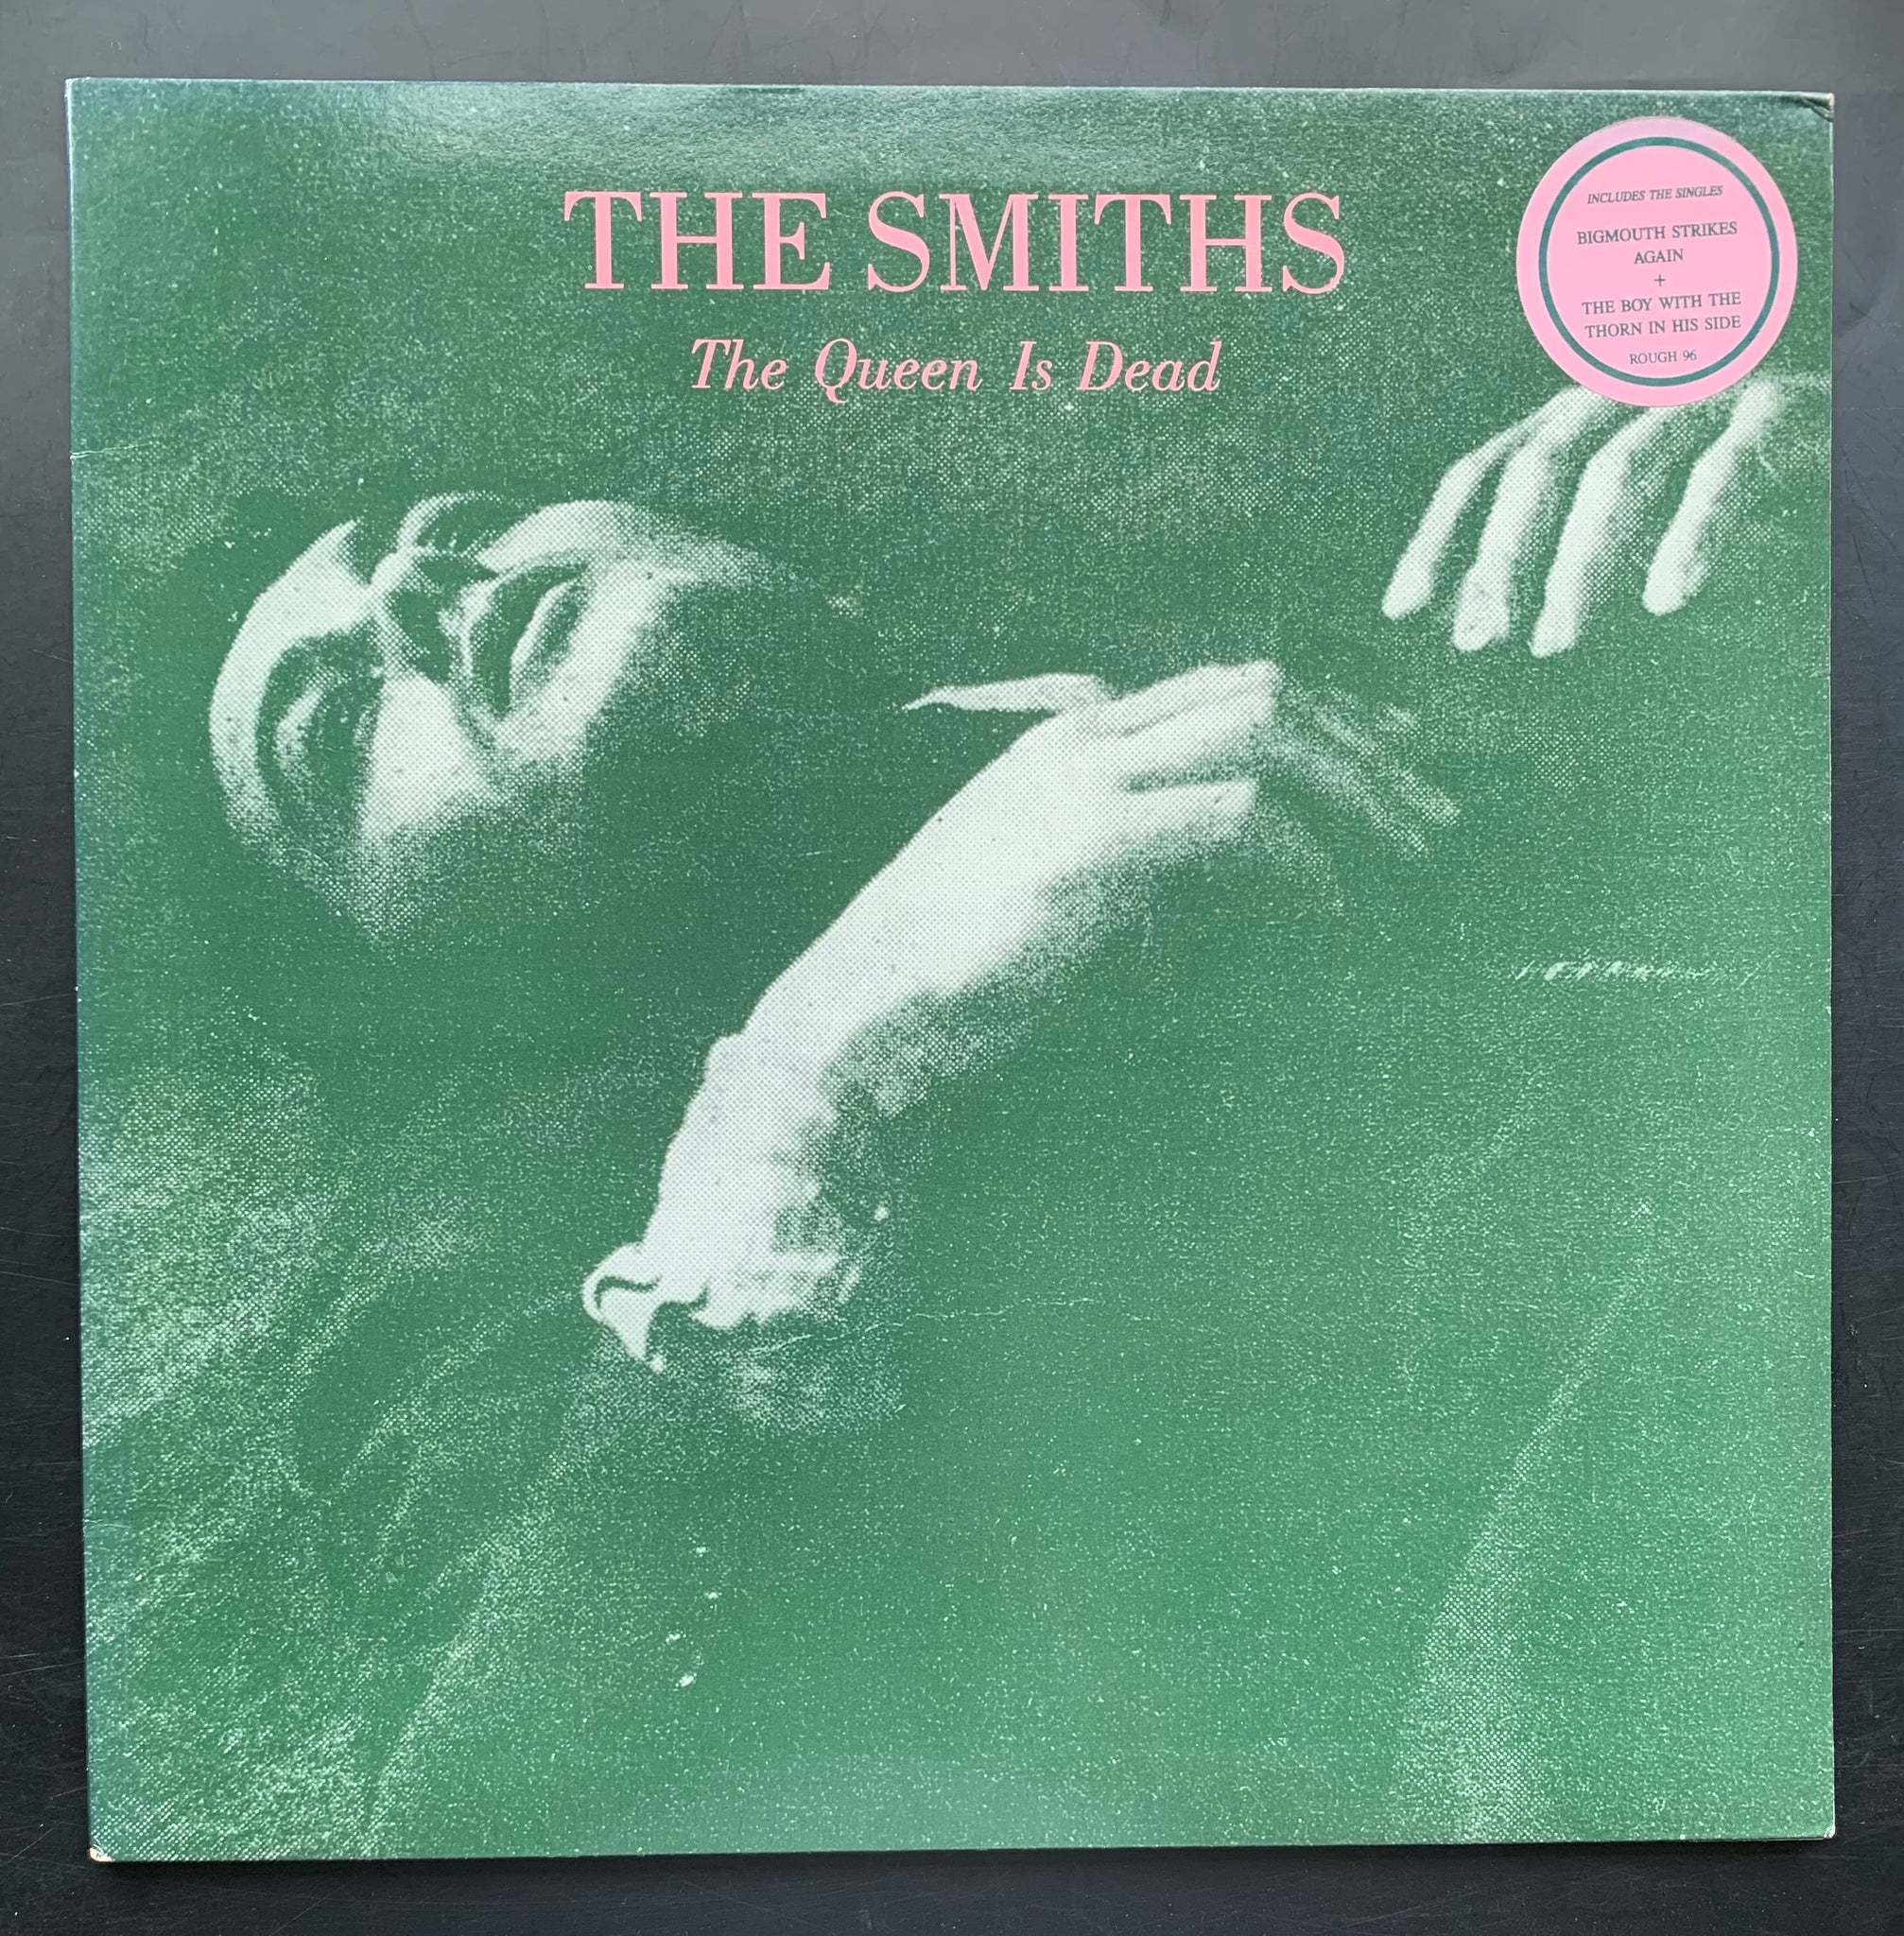 The Smiths 'The Queen is Dead' LP